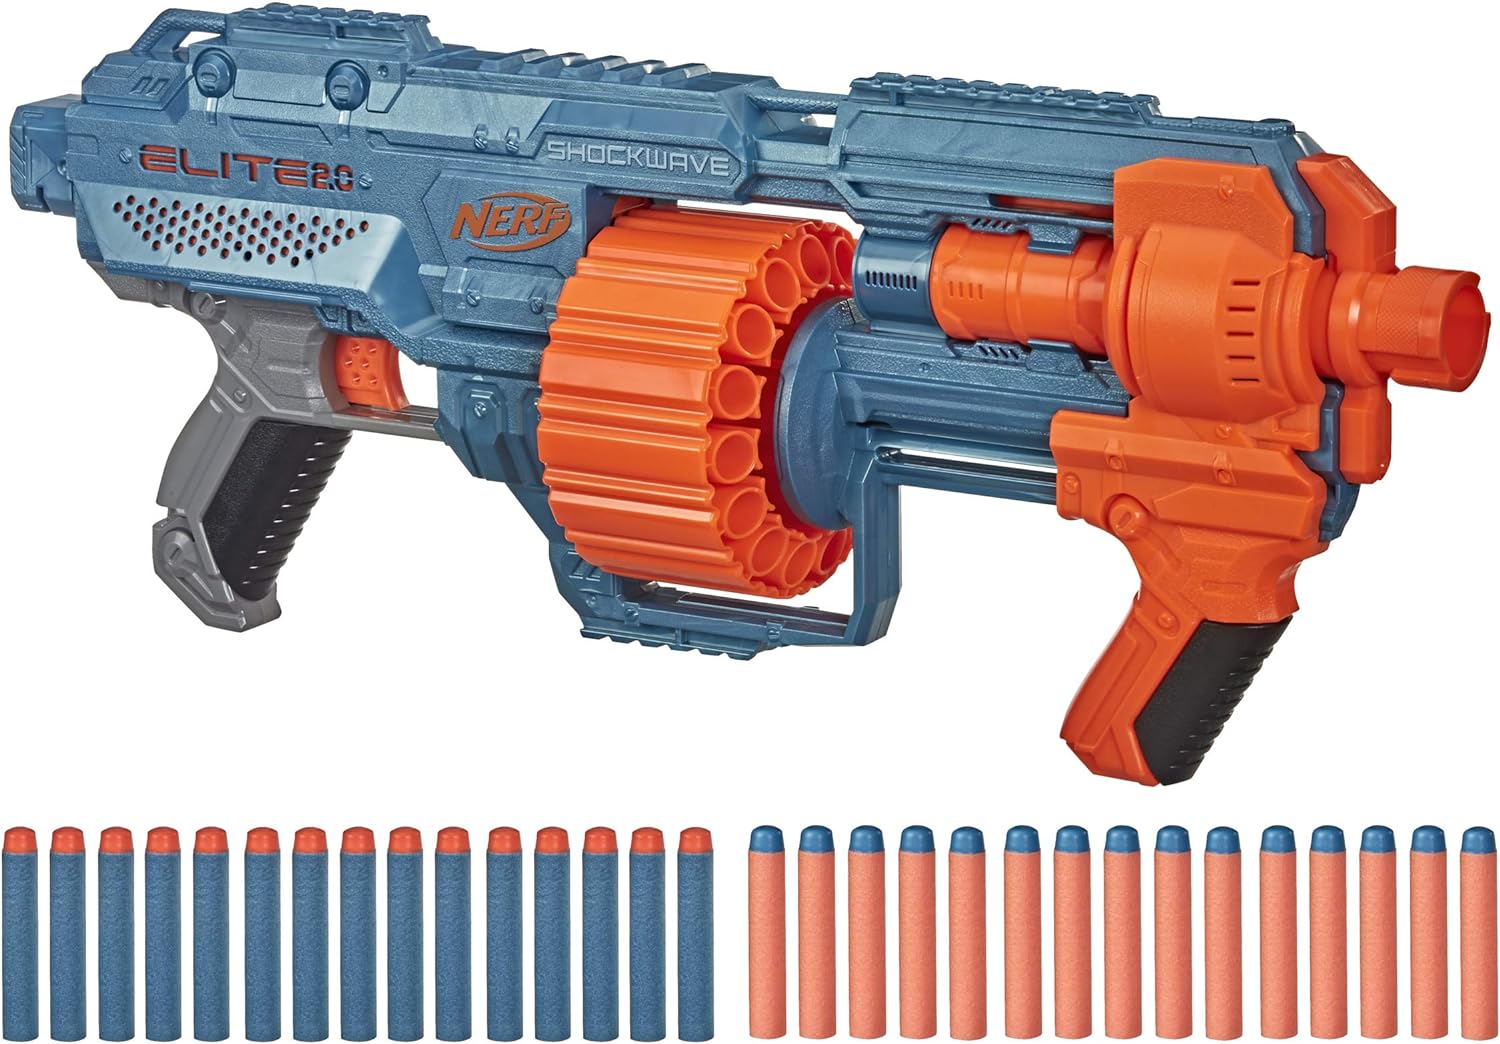 Teens have a way of saying things. And sometimes instead of providing the calm and safe environment that is so important for their development, I pick up a Nerf Blaster and let them have it. But the problem with the Blaster is that the chamber holds so few darts. The Nerf Elite 2.0 holds 15 darts with an additional 15 darts for backup. It' perfect right after your teen has chosen their words so carefully. Do the darts get stuck sometimes Of course. Those darts have been through things. They ha